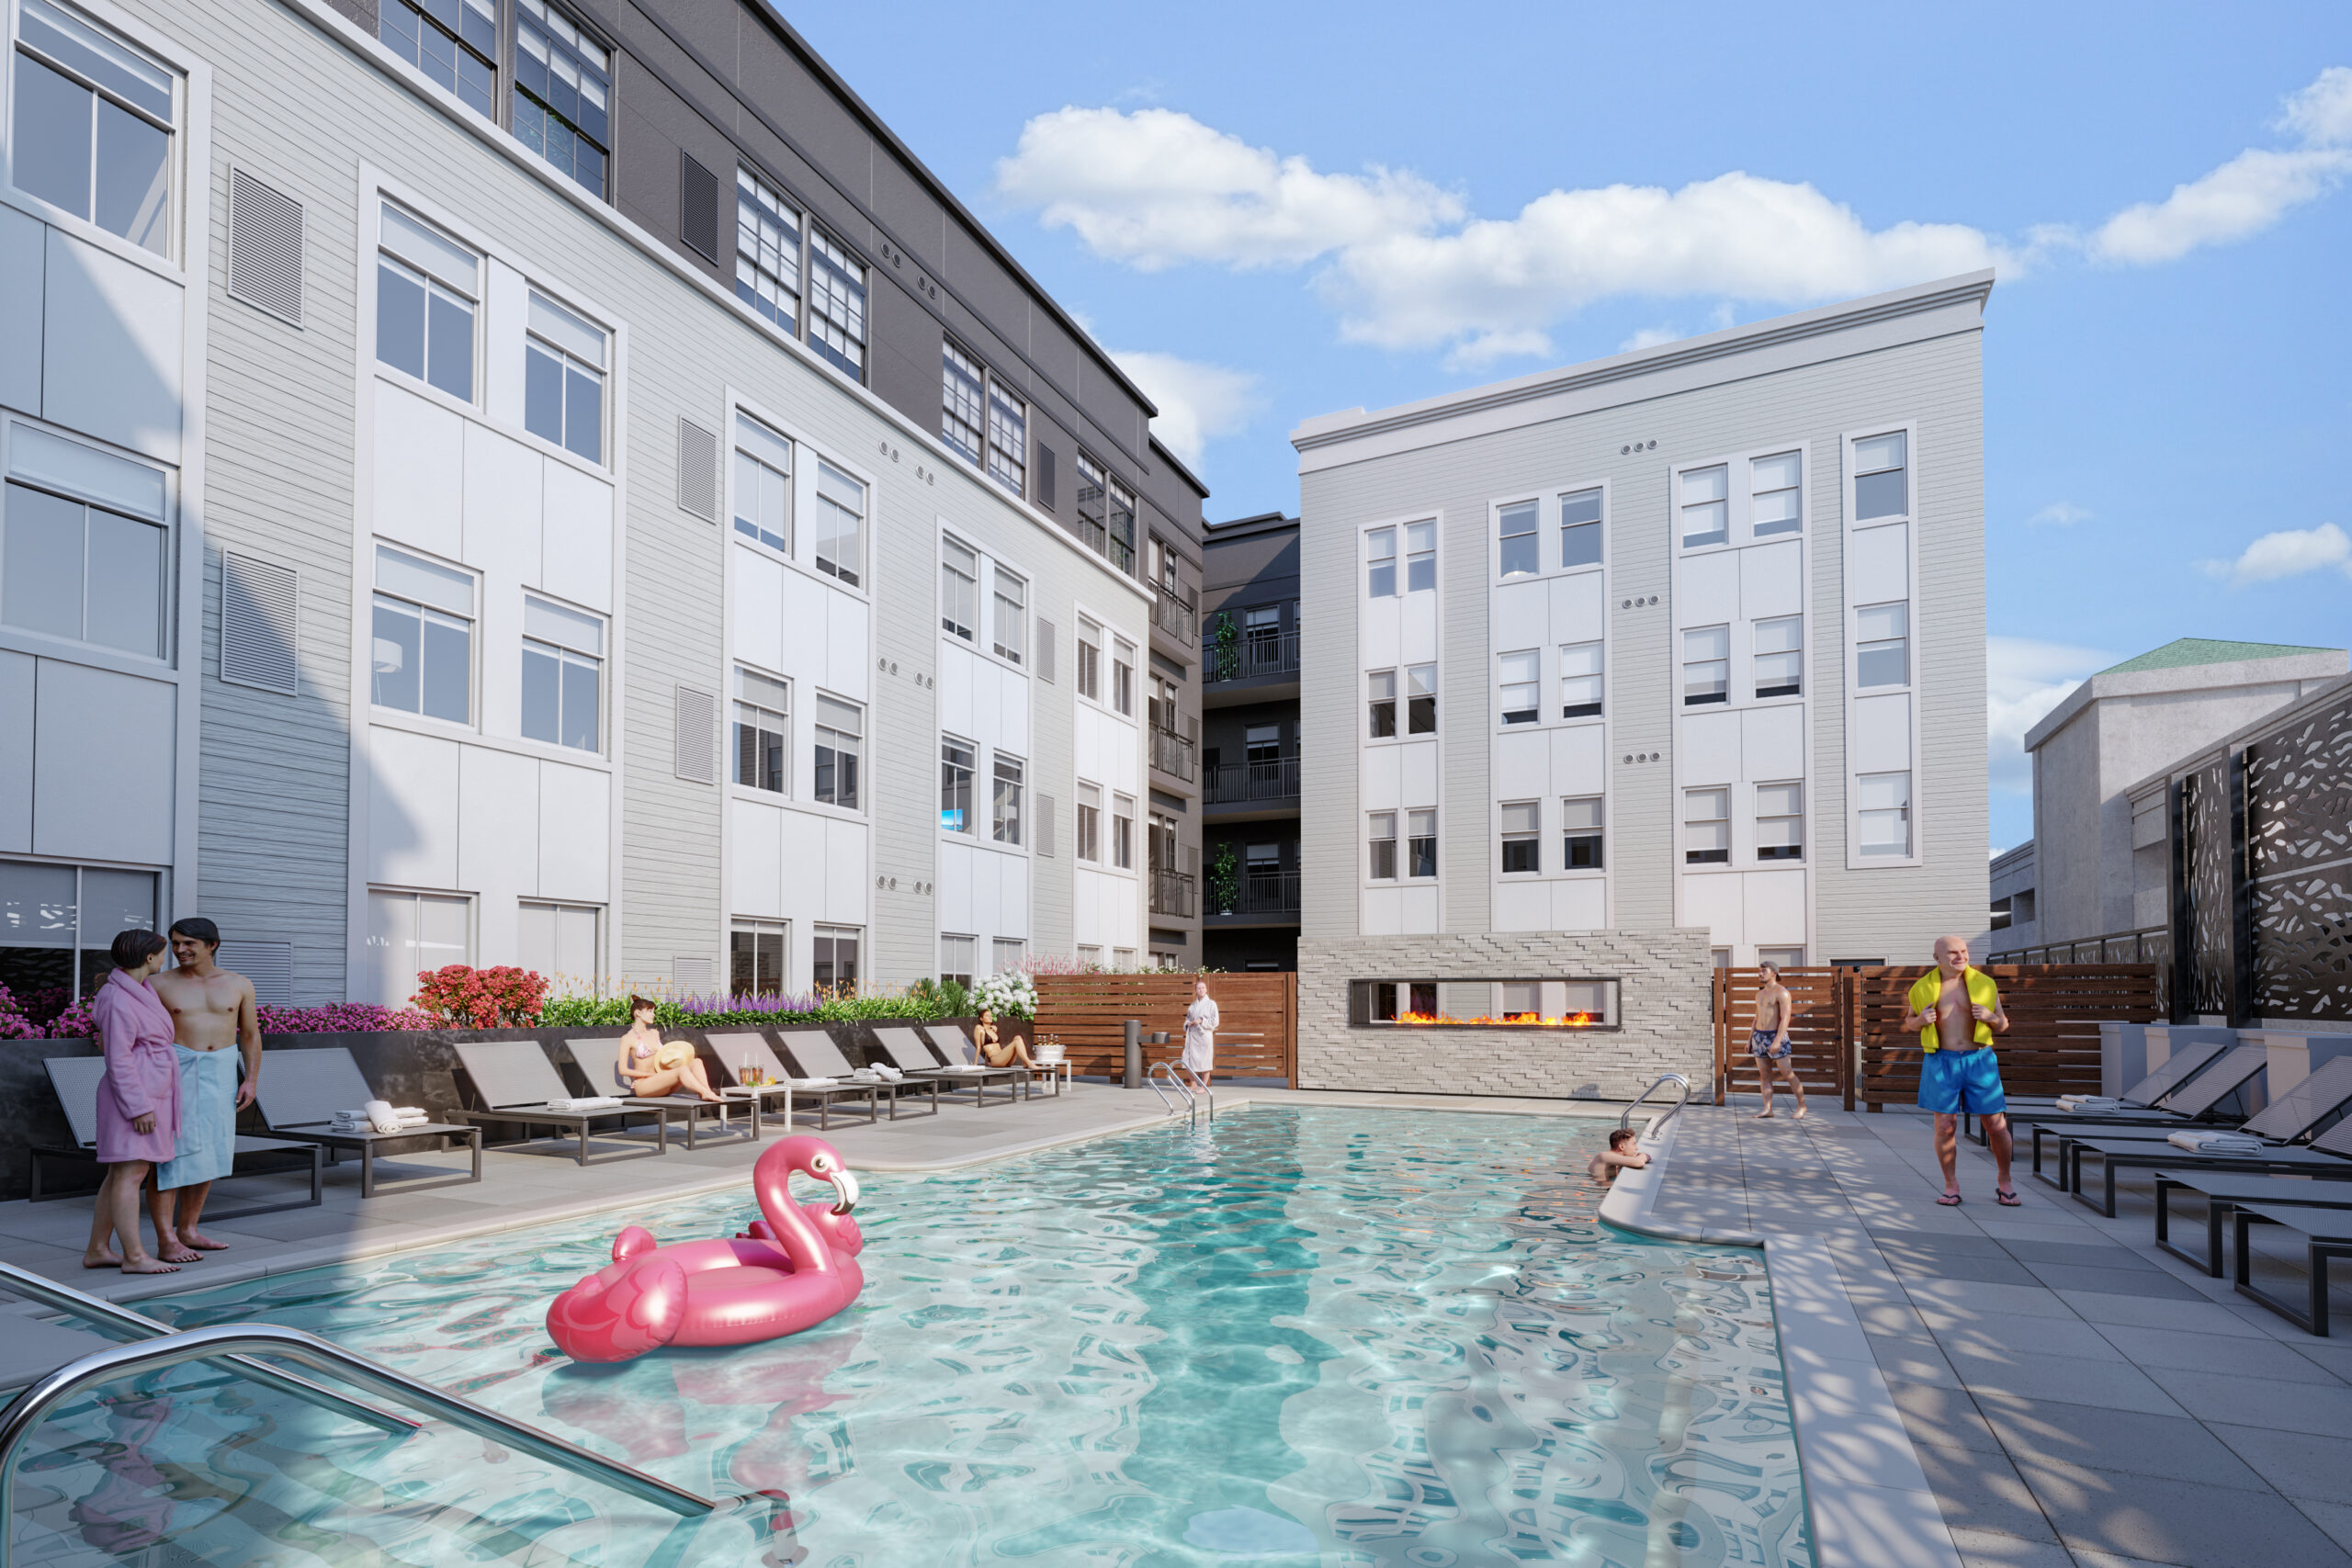 Pool area with lounging chairs and a pink flamingo float surrounded by the apartment building with windows.